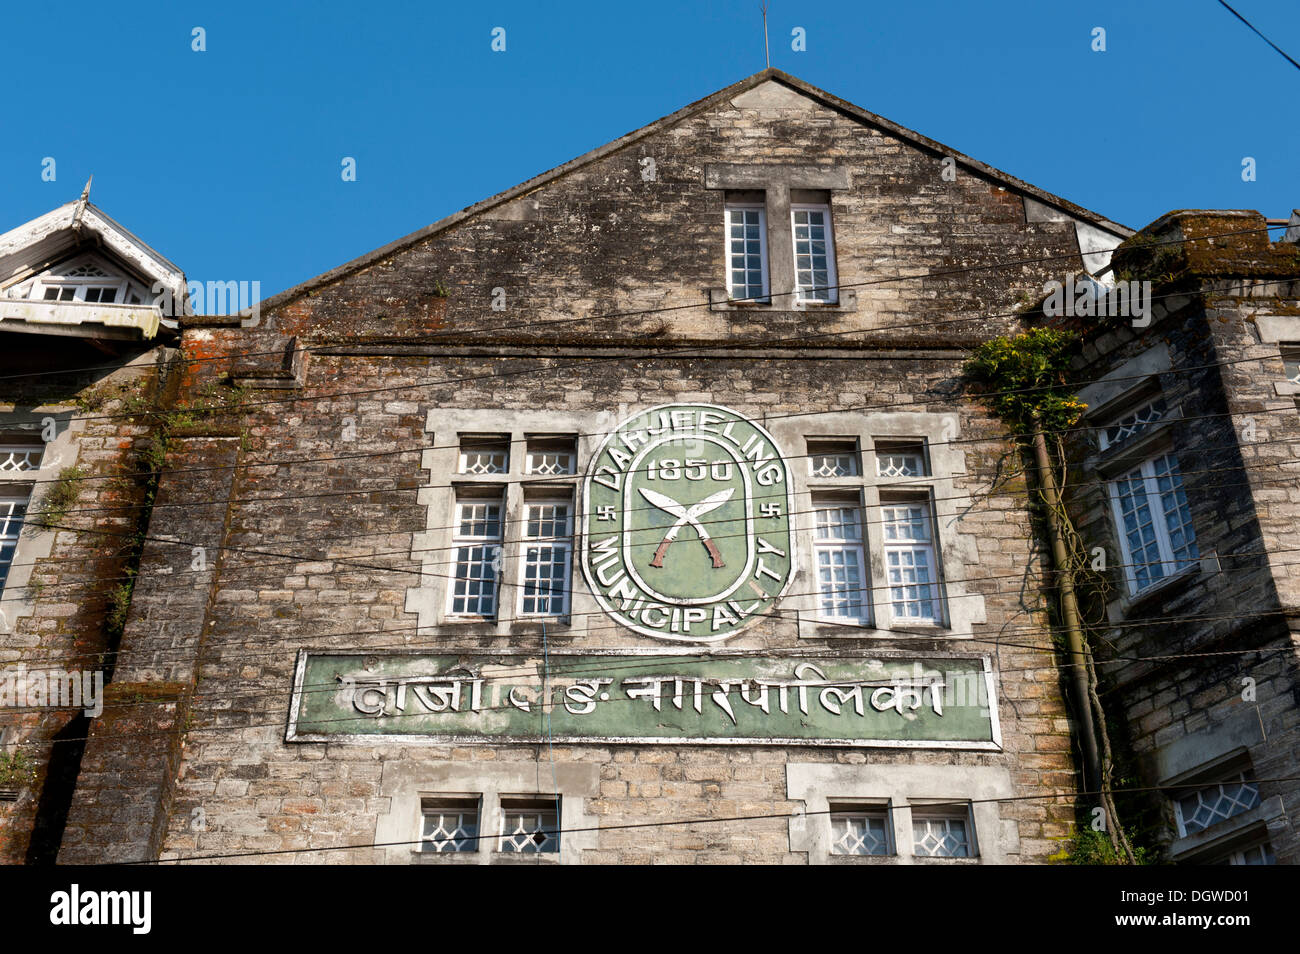 Old British colonial building, sign 'Darjeeling Municipality', Himalayan foothills, West Bengal, India, South Asia, Asia Stock Photo